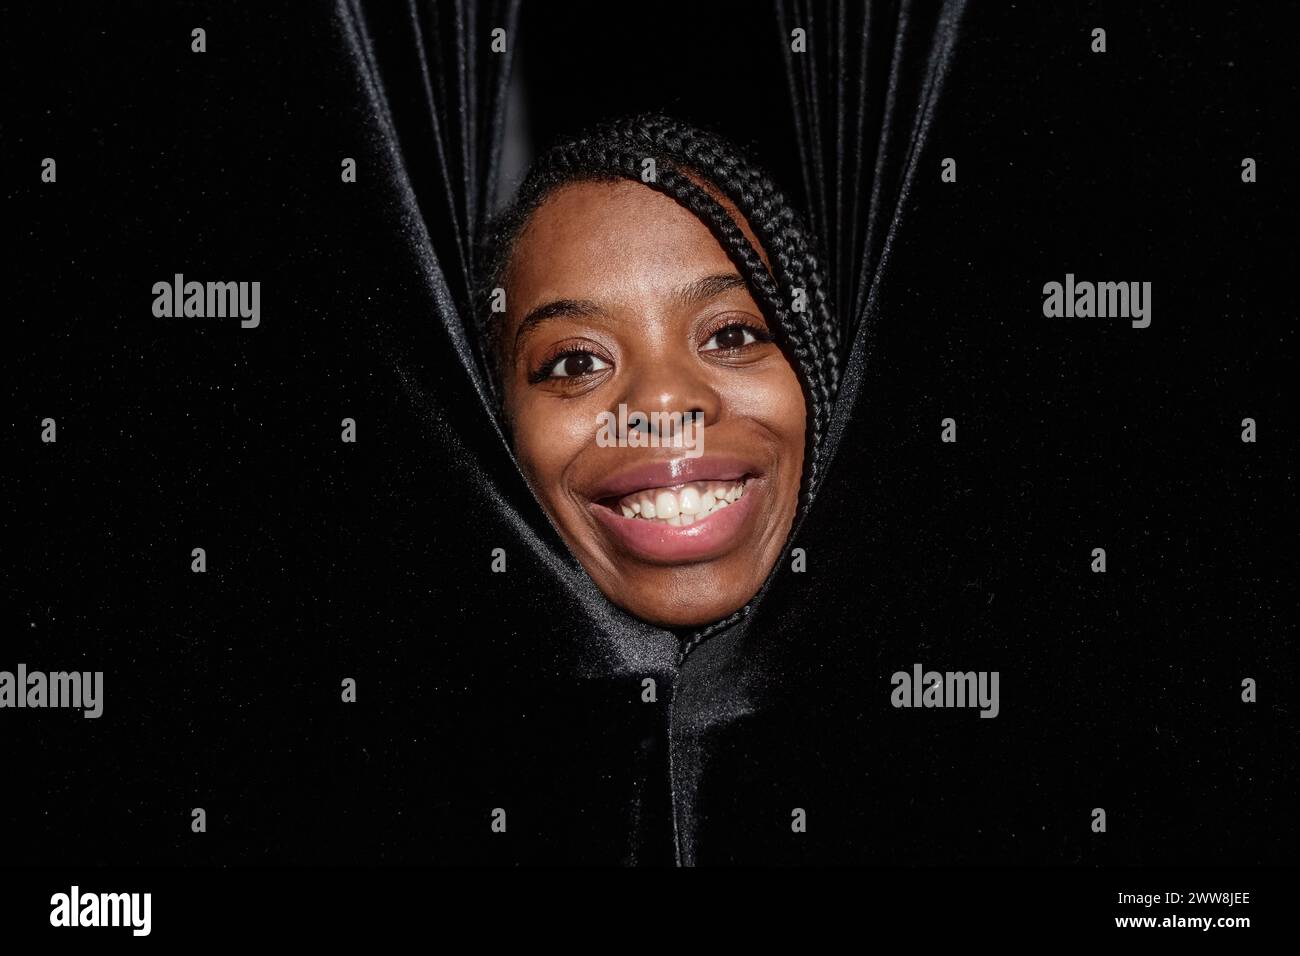 Close up of smiling African American woman peeking from curtains on theater stage and looking at camera Stock Photo